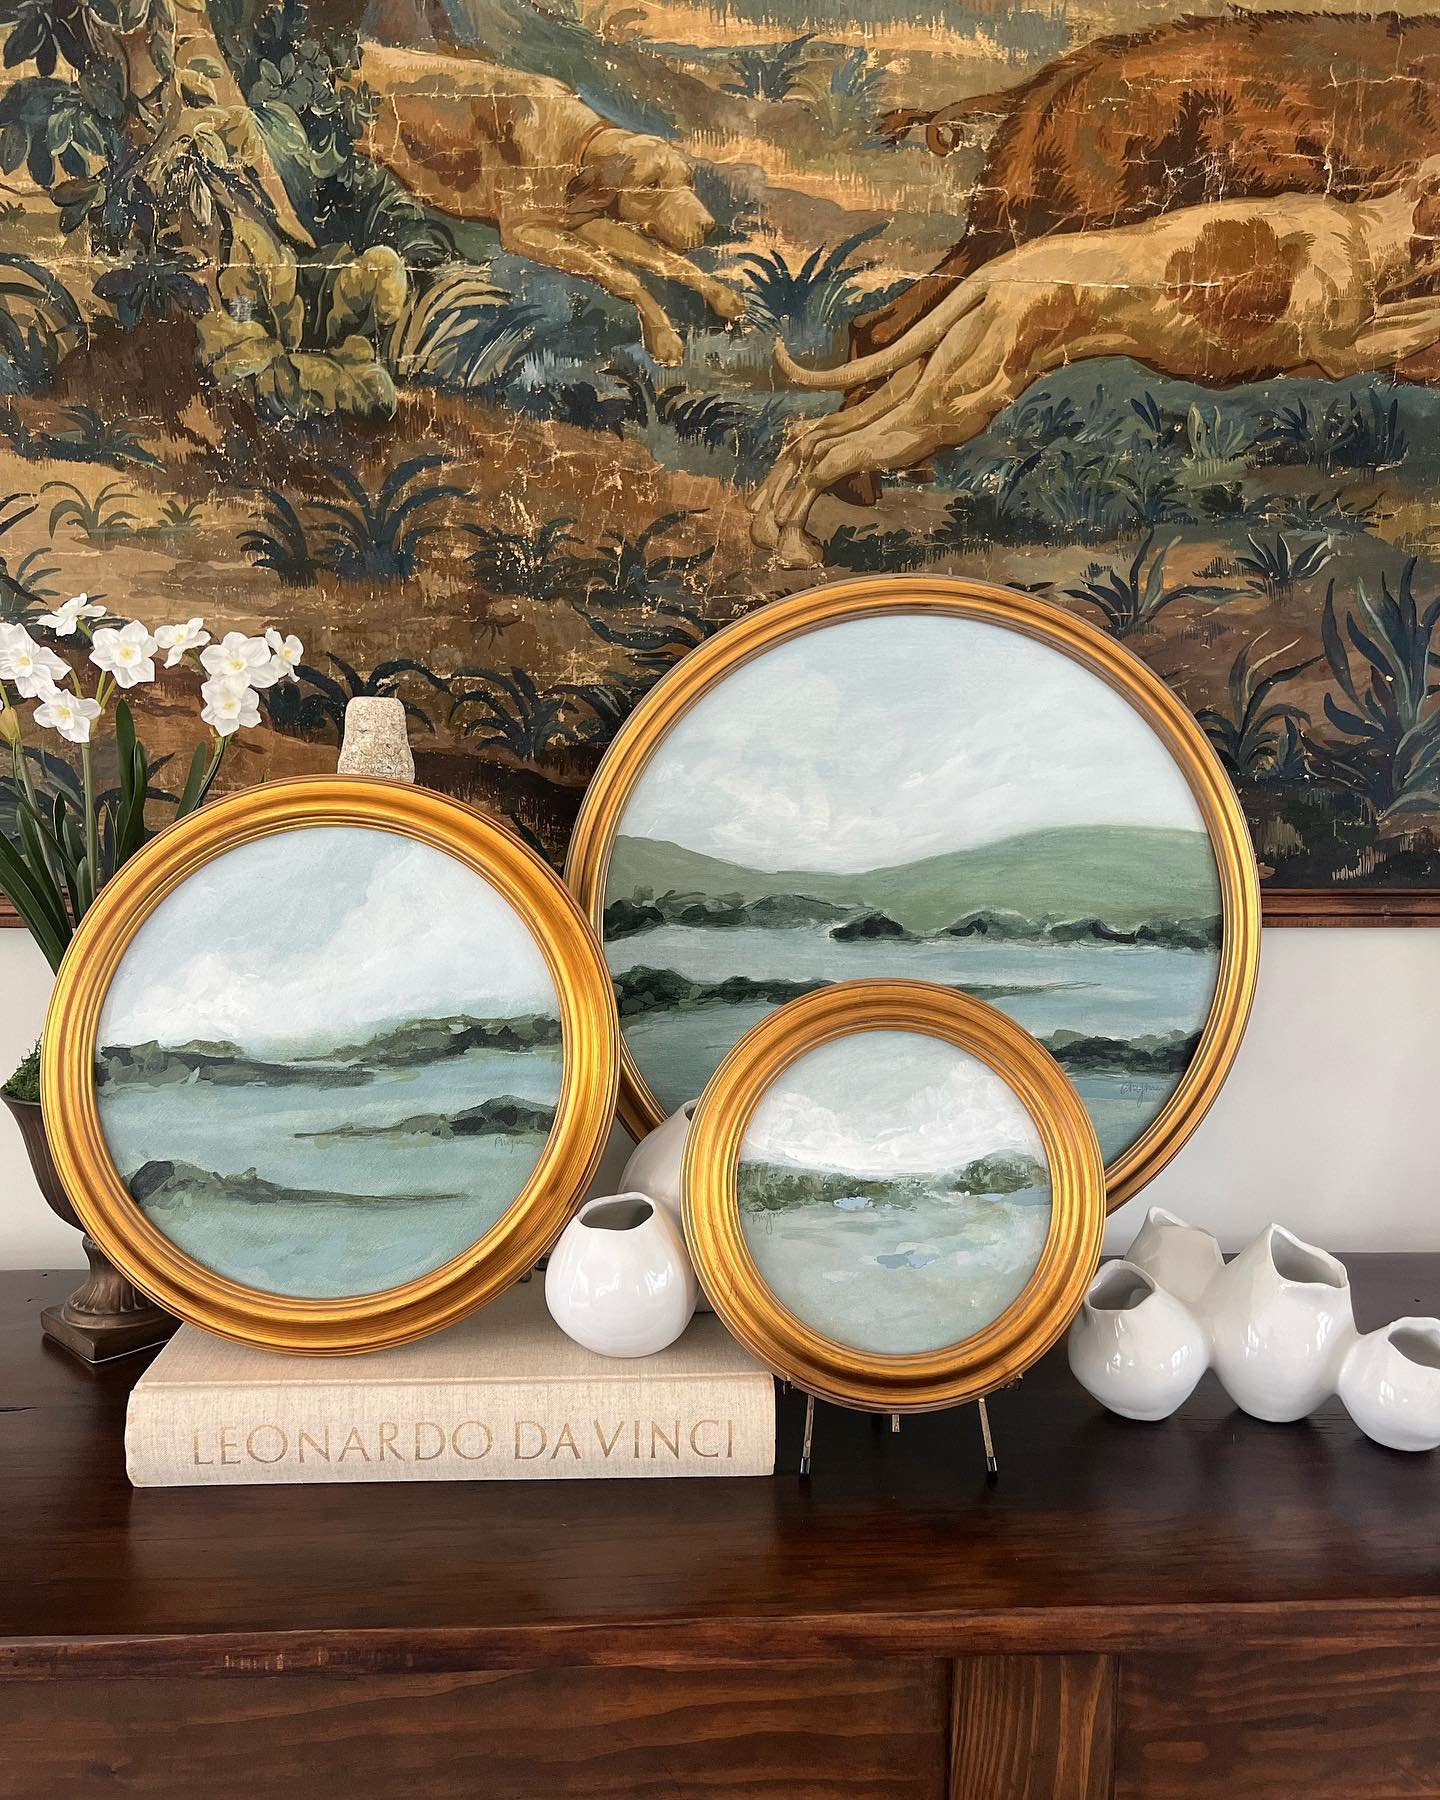 A new release of round Looking Glass Landscapes getting ready for @thehardingartshow this year. I love the softness that the round frame can bring to a space and how these can be styled in so many ways. A favorite for sure.